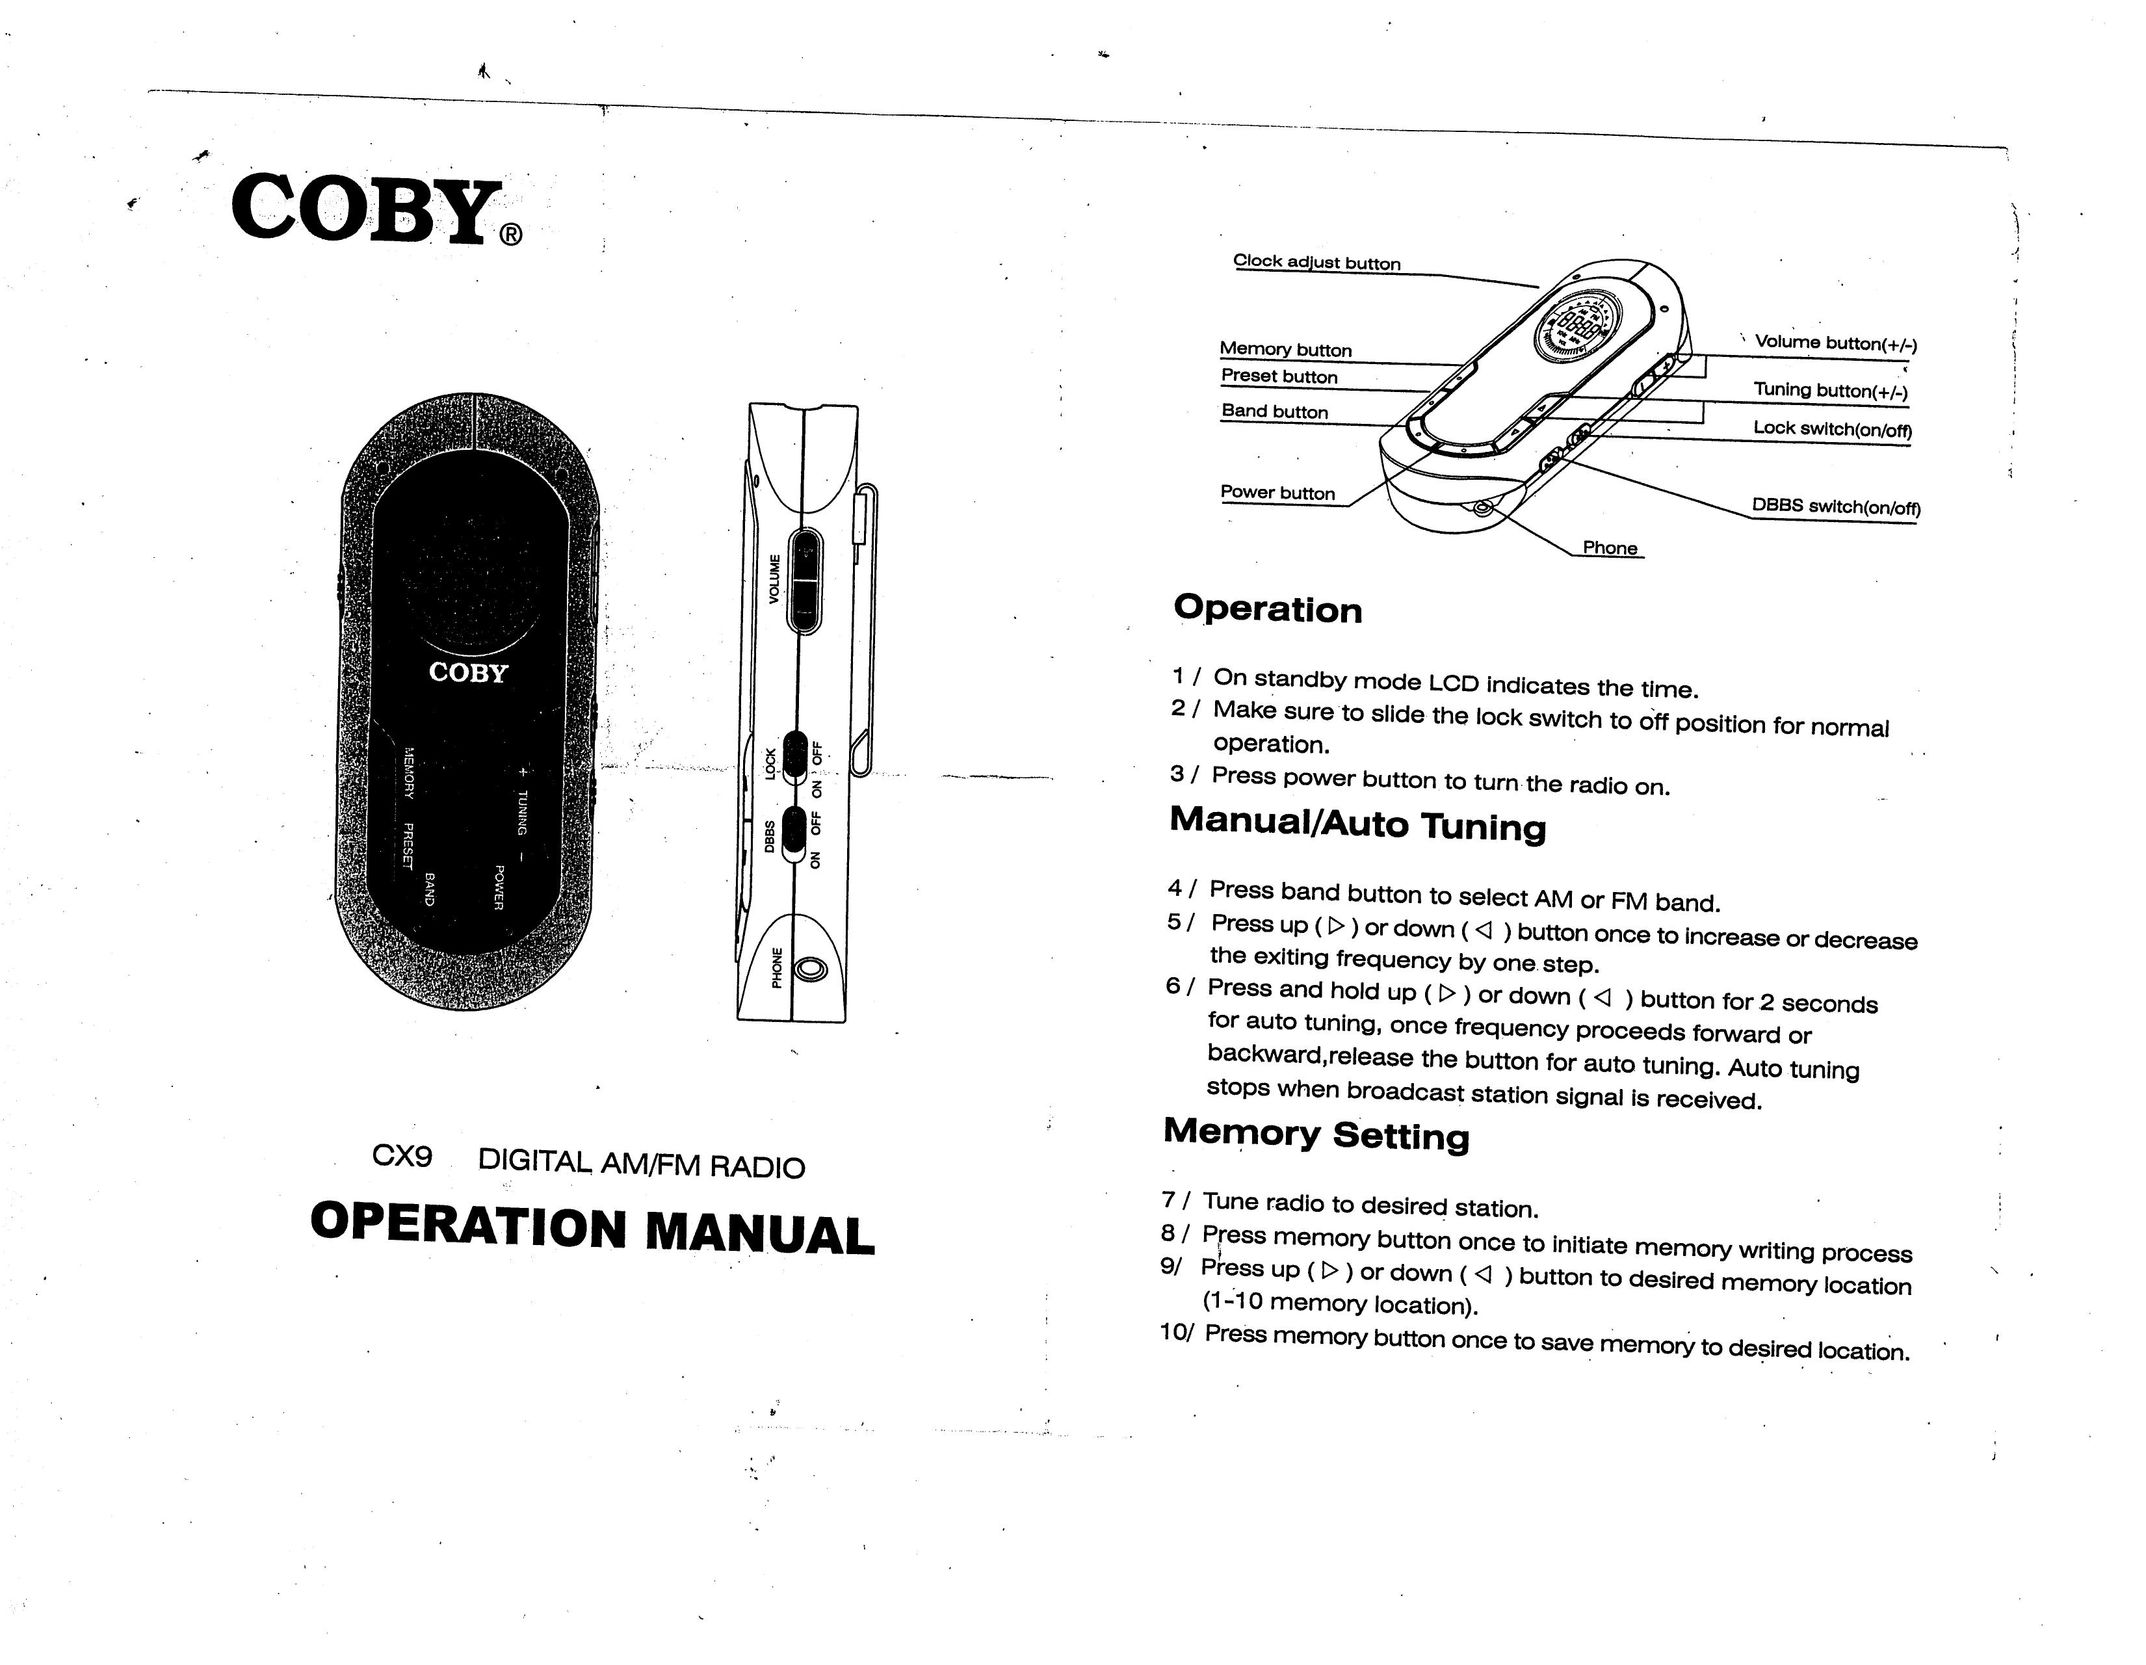 COBY electronic CX9 Radio User Manual